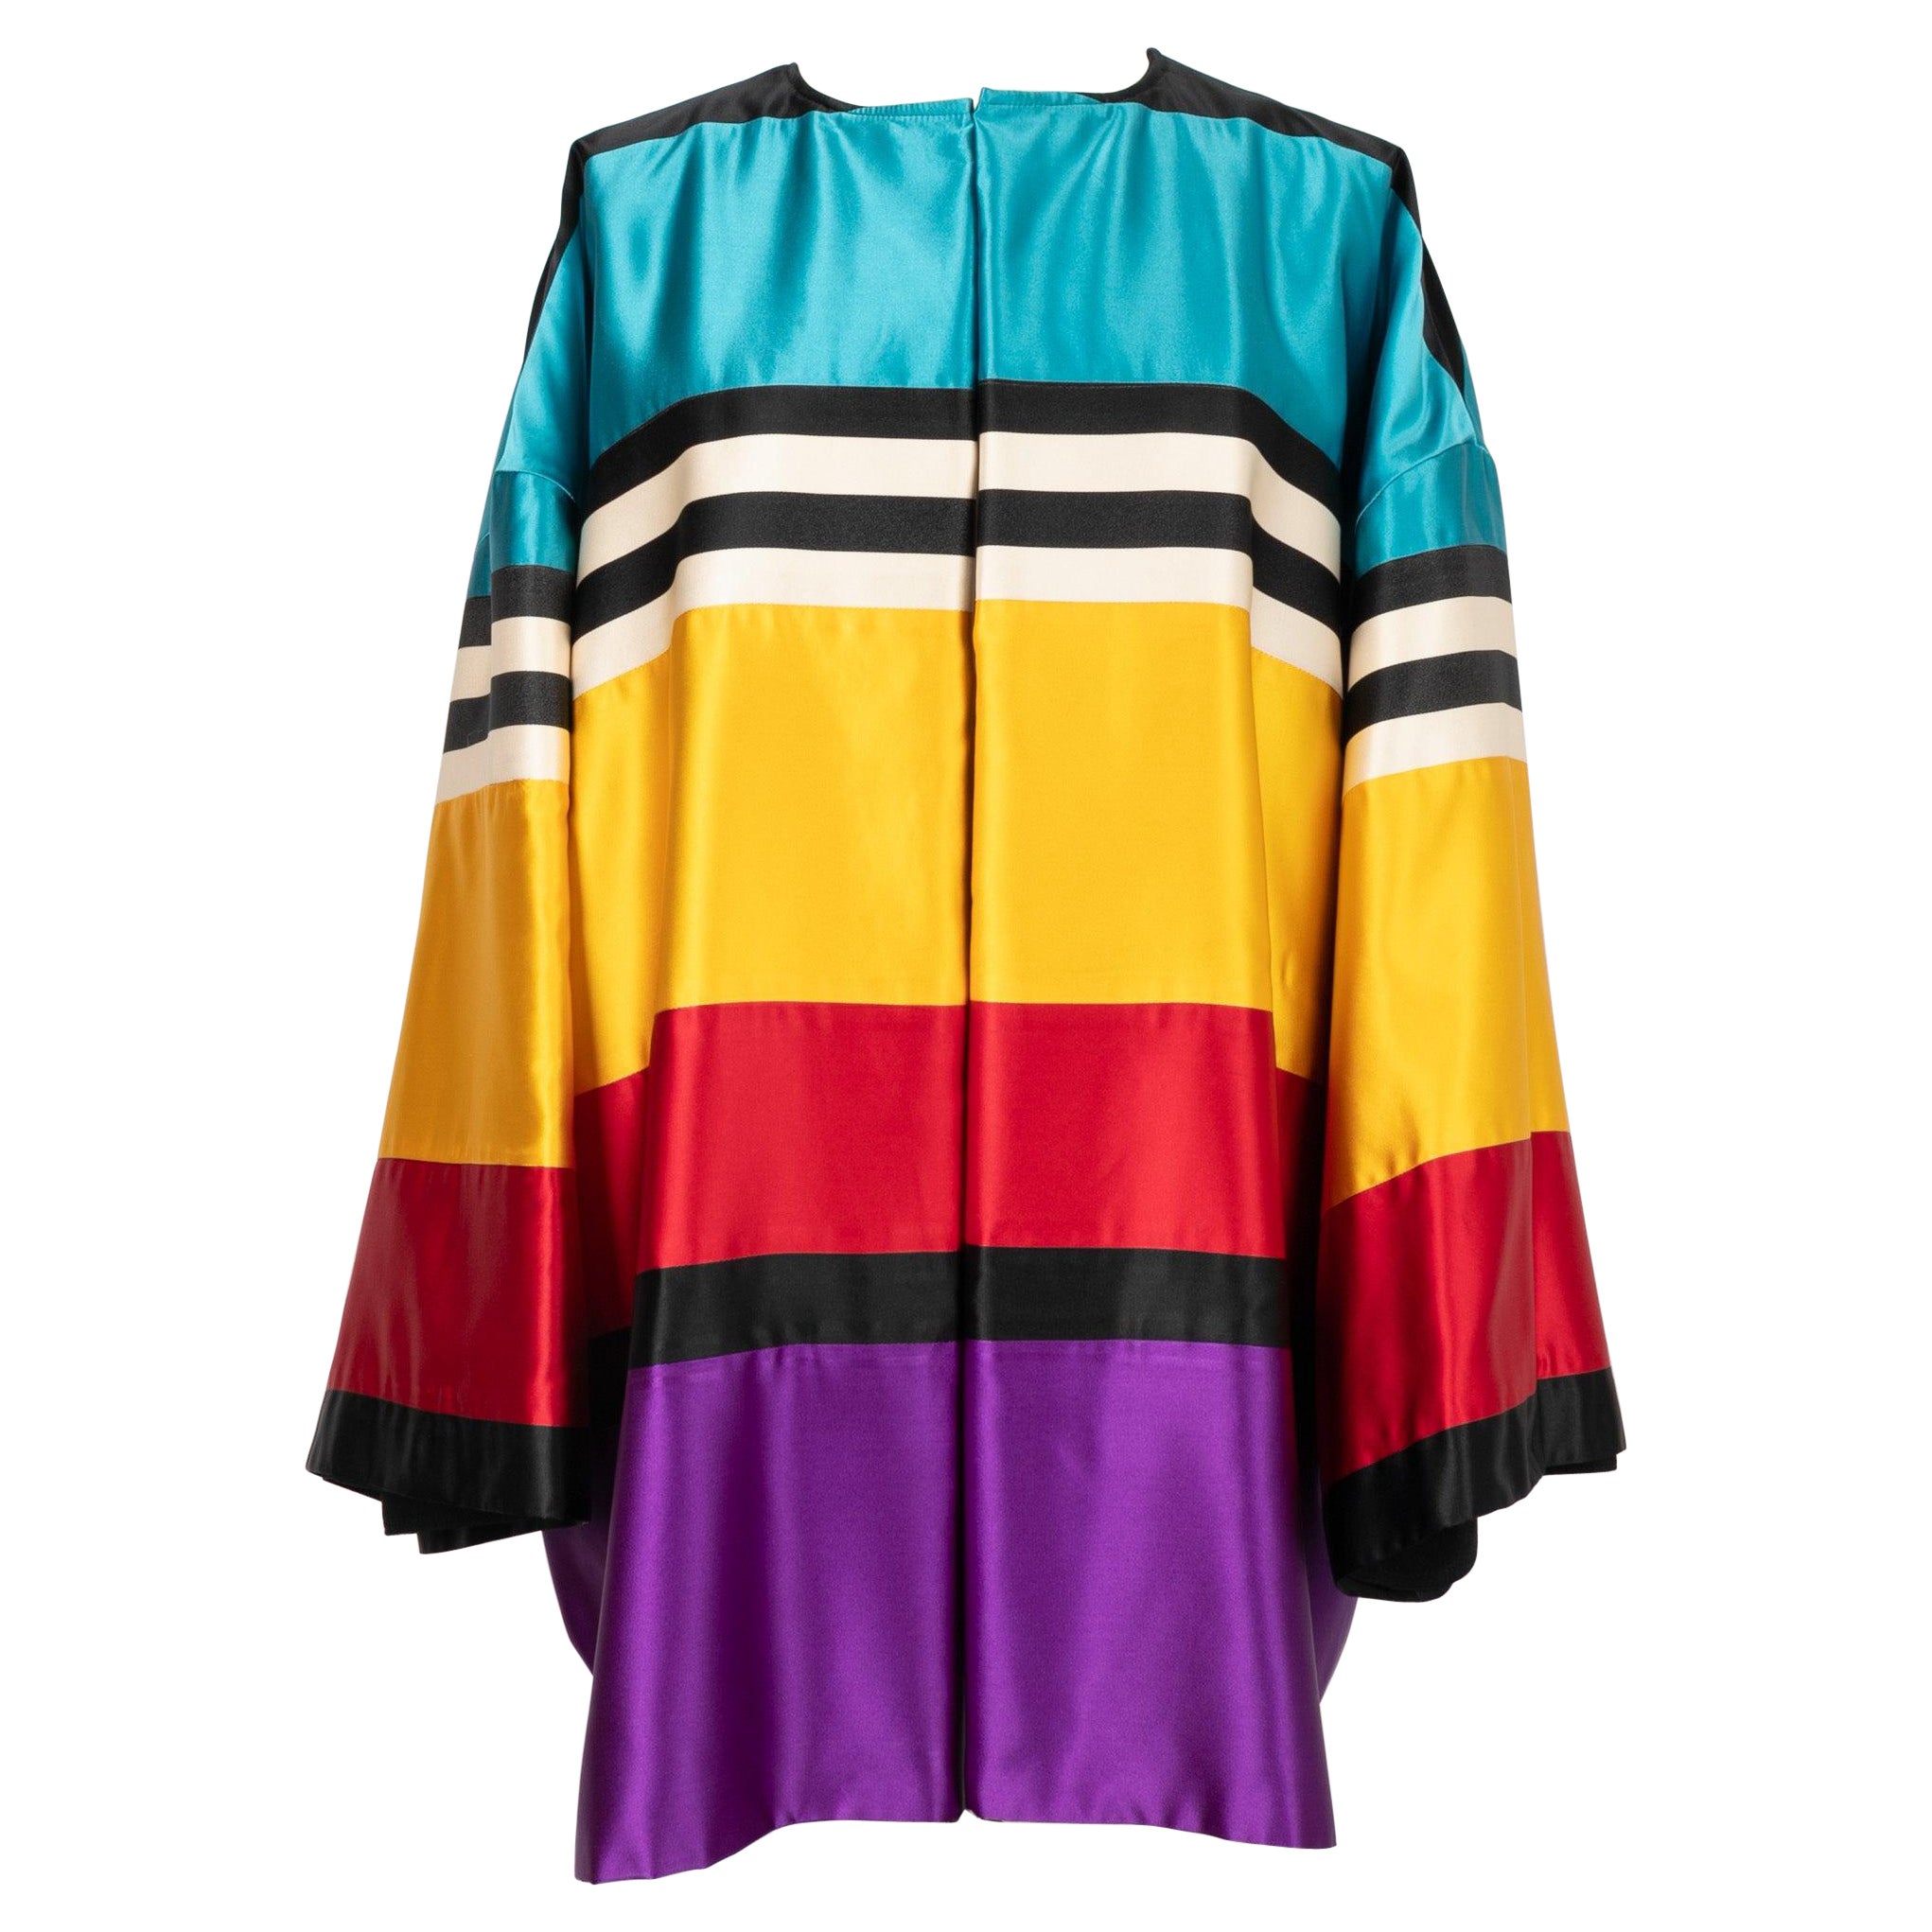 Gianfranco Ferré Multicolored Silk Jacket with Black Wool Lining